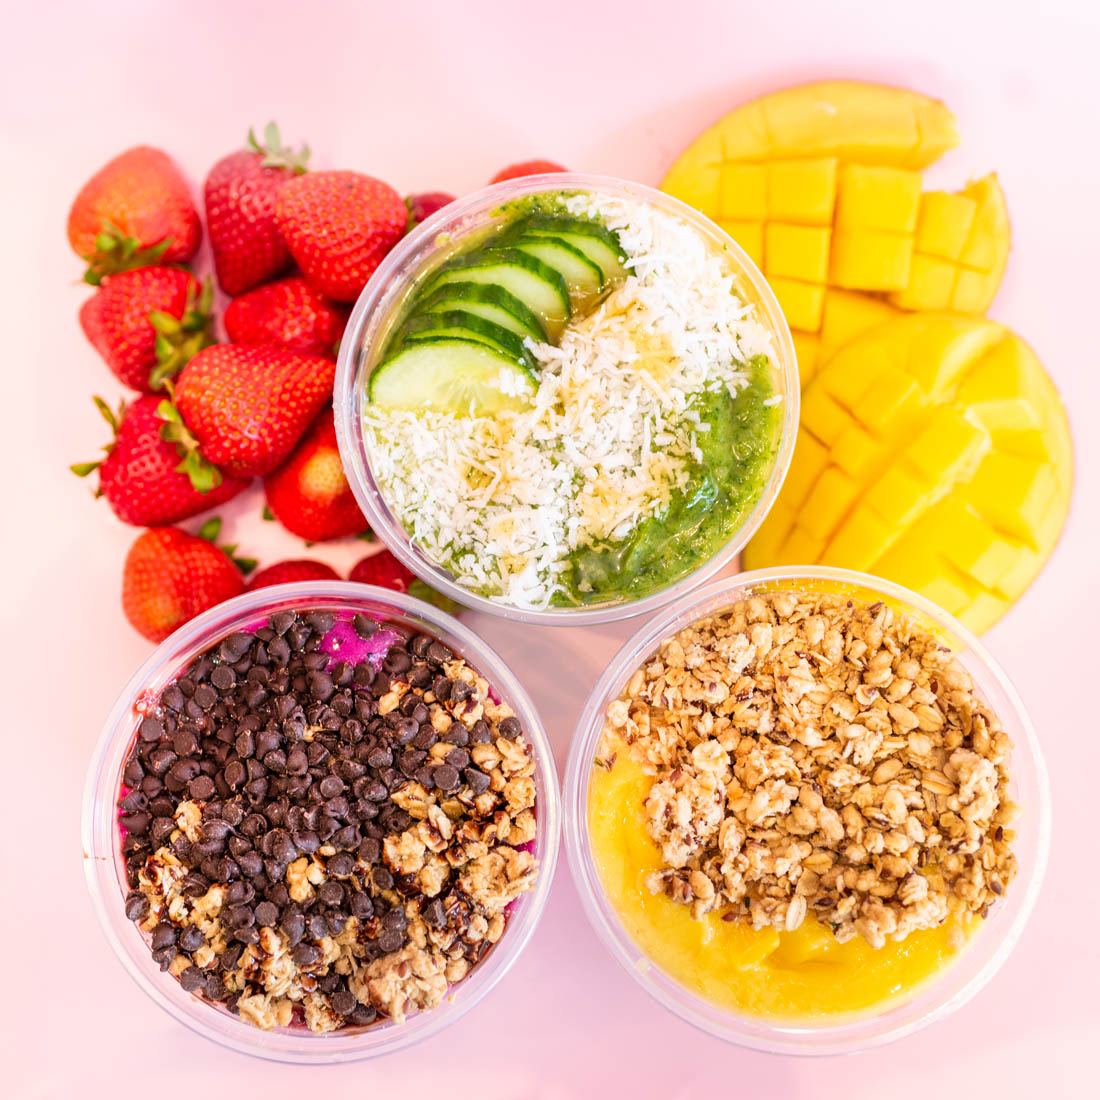 Rush Bowls smoothie bowls nutrition info in Lakewood, WA.